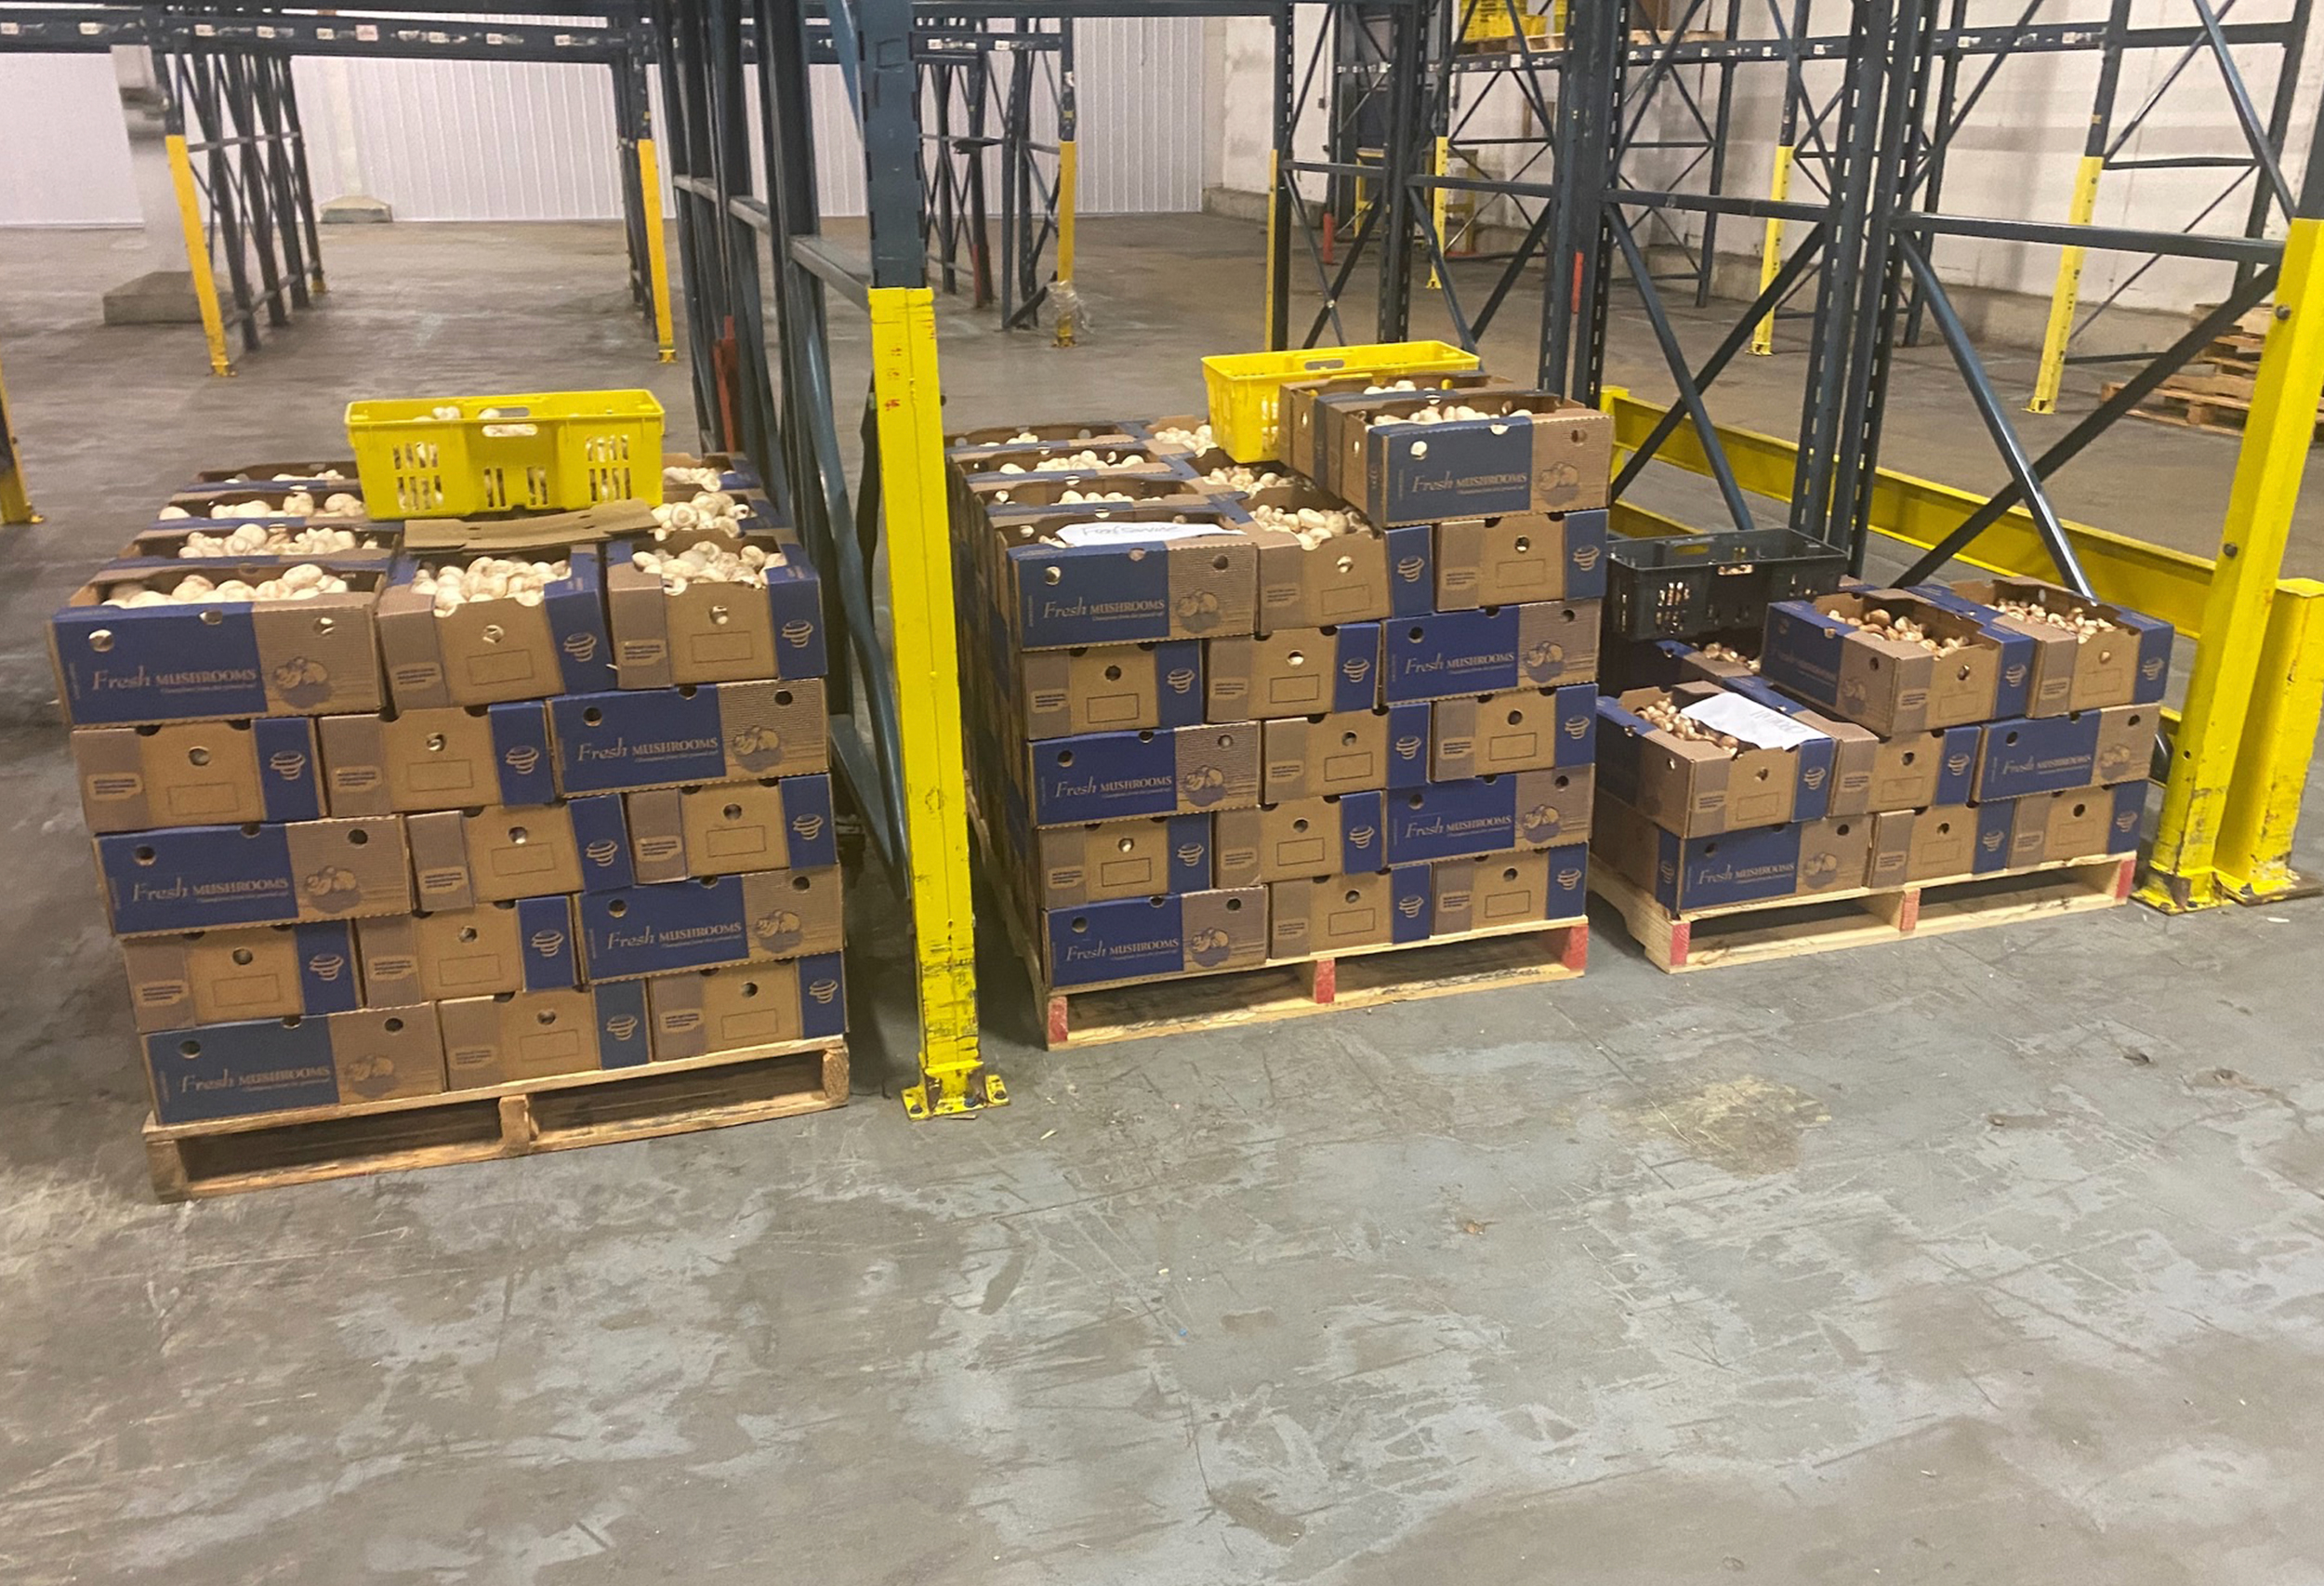 Boxed mushrooms at South Mill Indianapolis distribution center